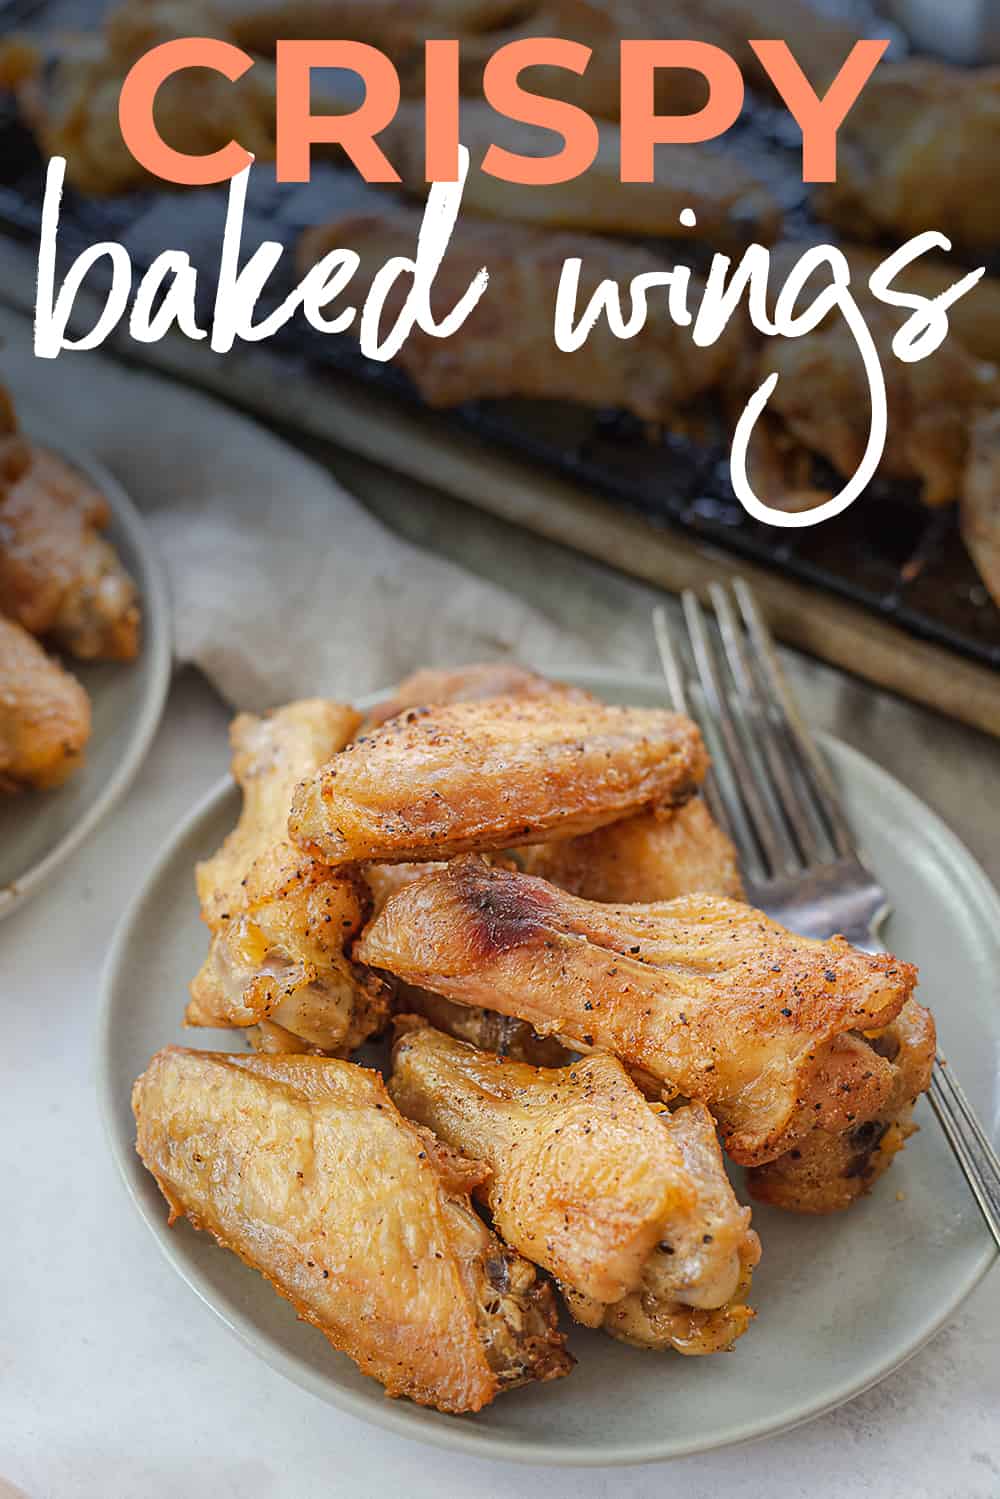 crispy baked chicken wings on plate with text for Pinterest.